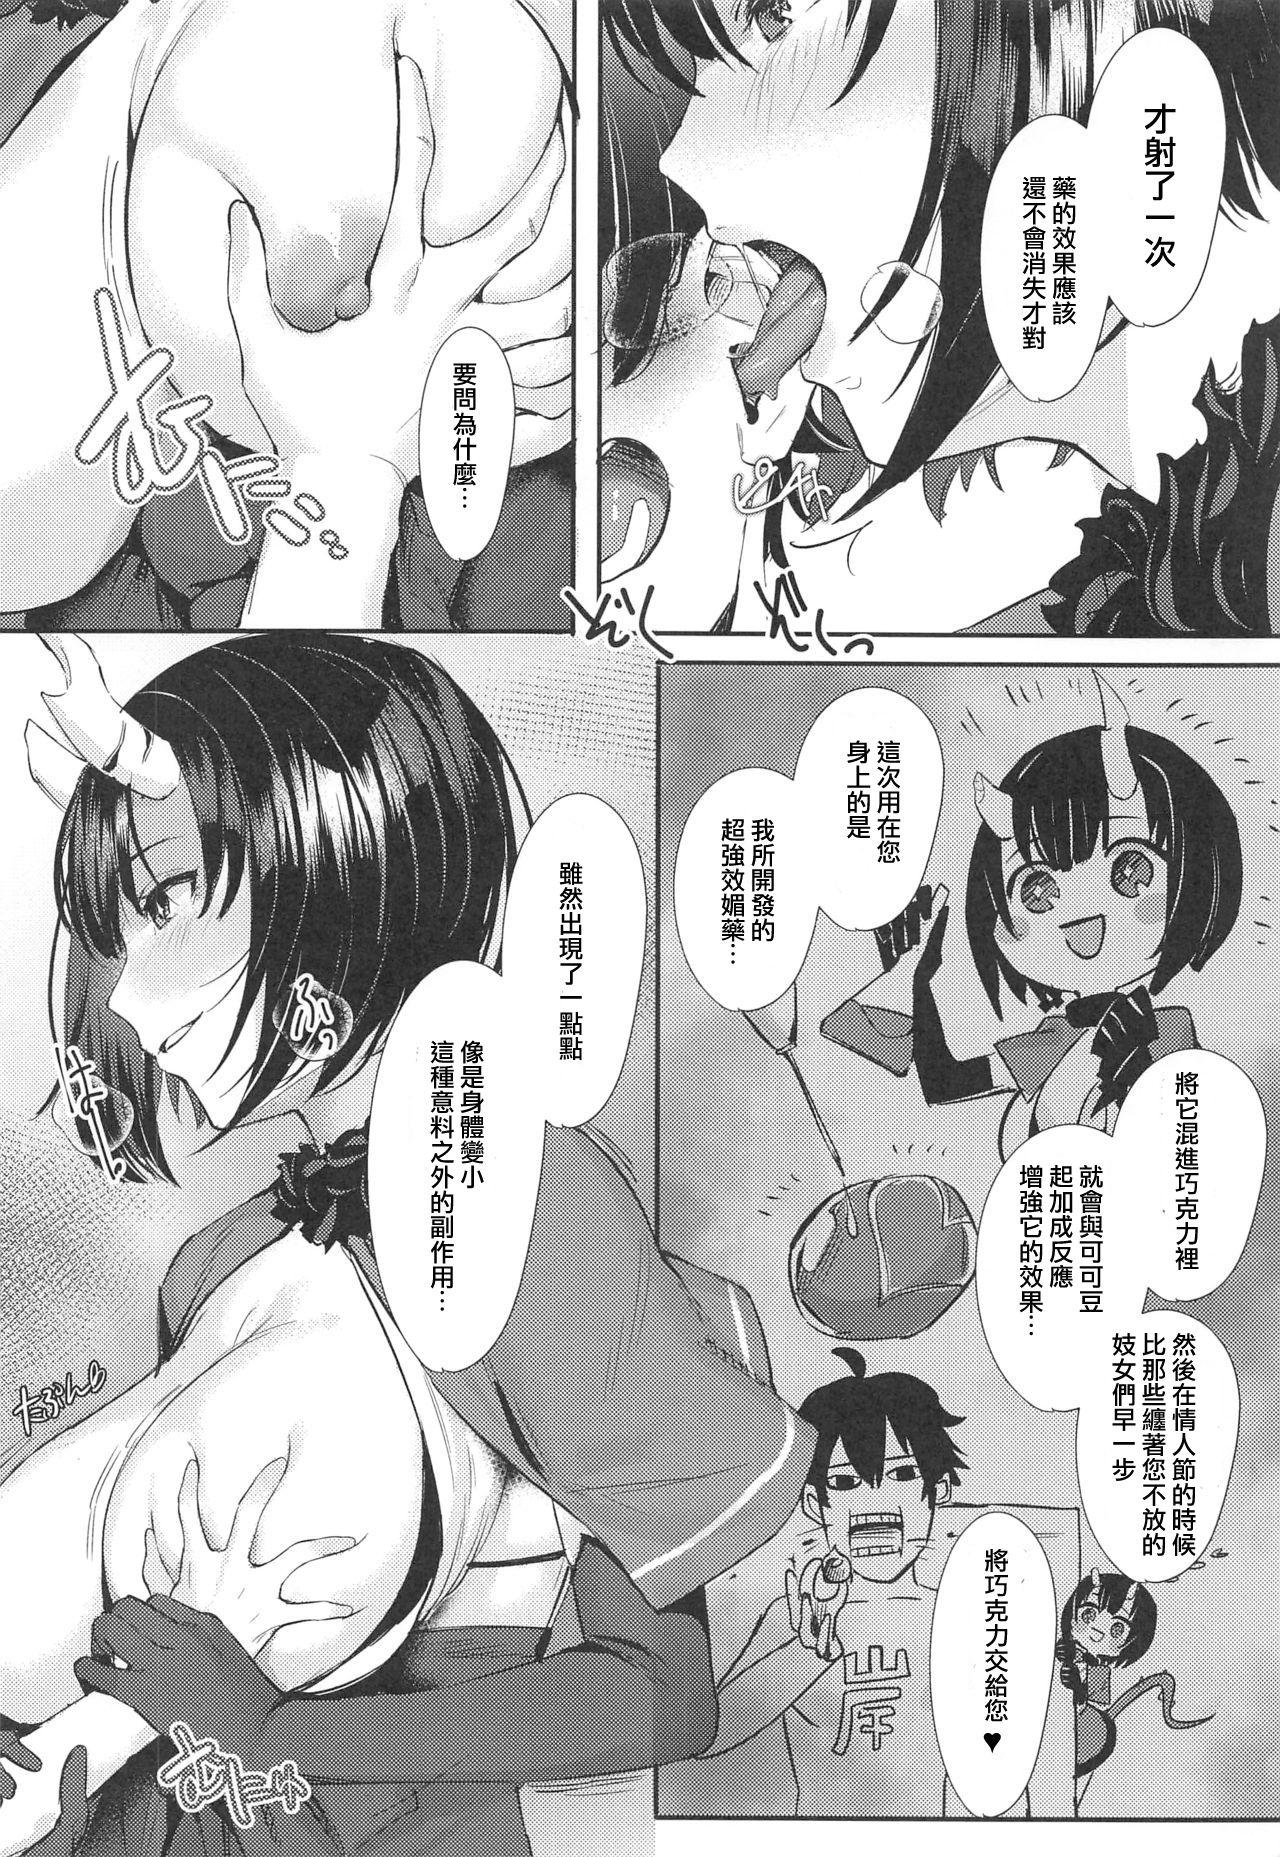 Adolescente Onee-chan Connect - Princess connect Menage - Page 6